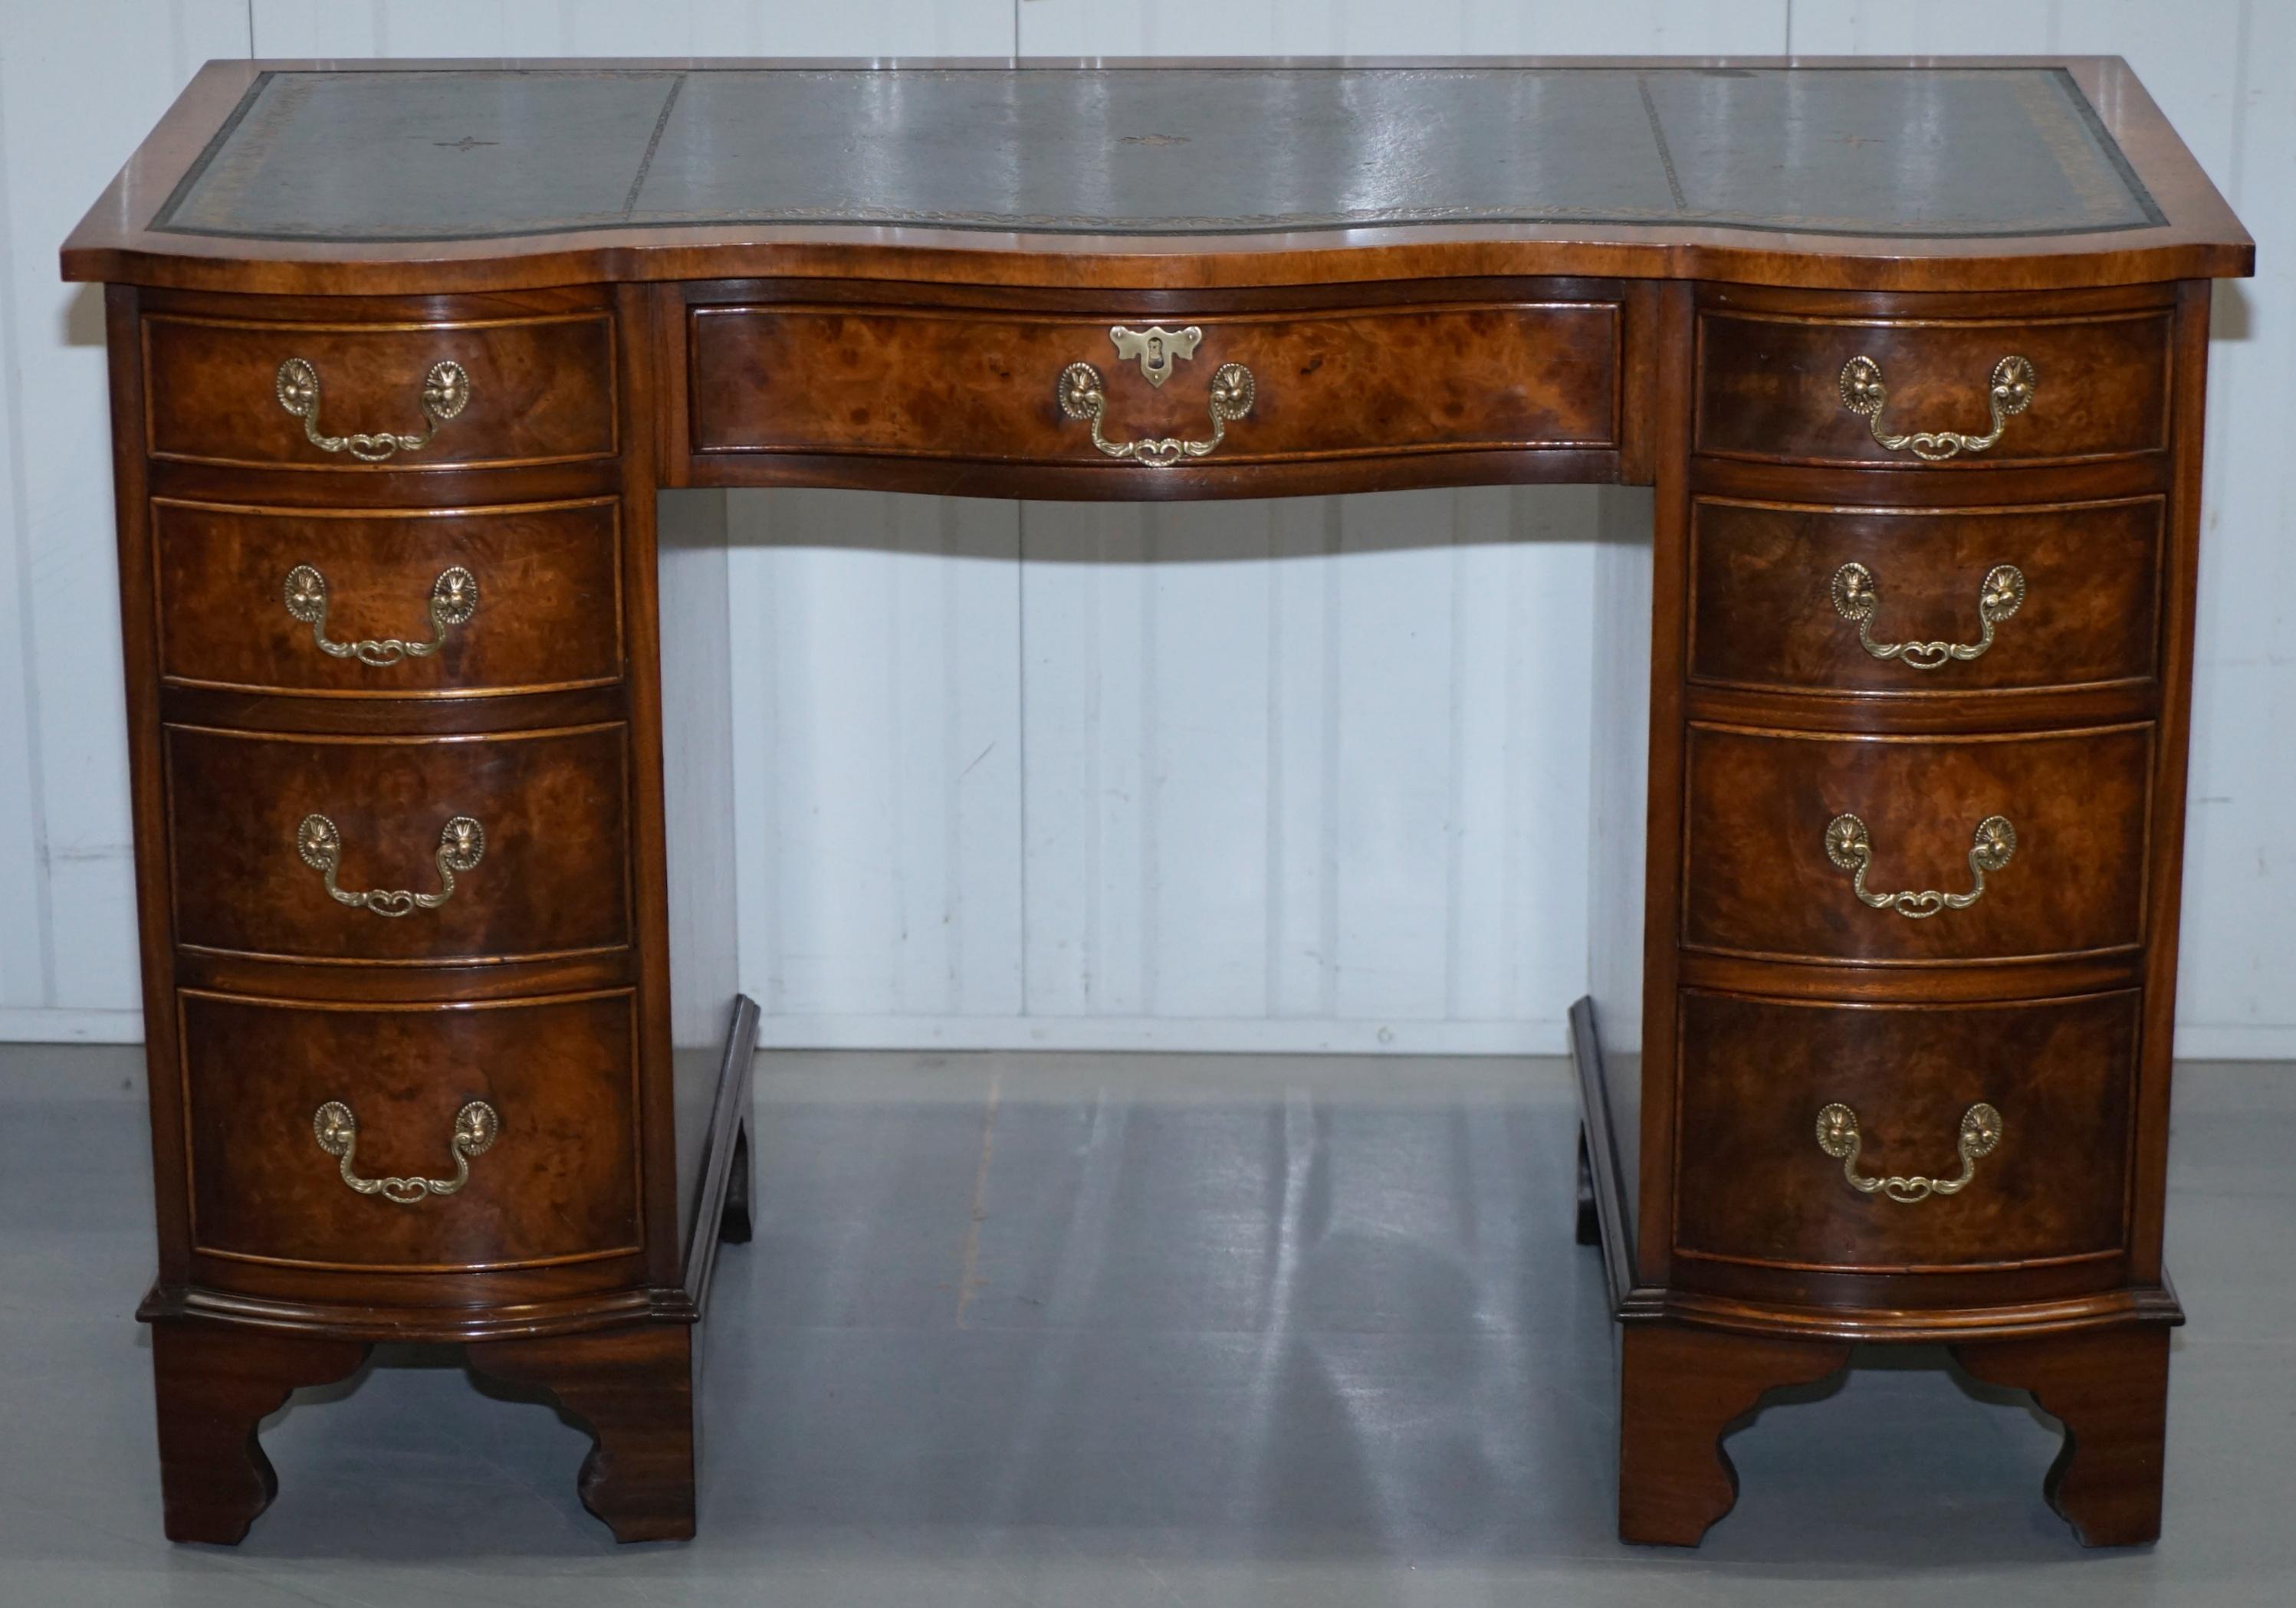 We are delighted to offer for sale this lovely vintage Serpentine fronted Burr or Burl Walnut twin pedestal knee hole partner desk with premium green leather writing surface 

A very good looking well made and ornate desk, its fully serpentine